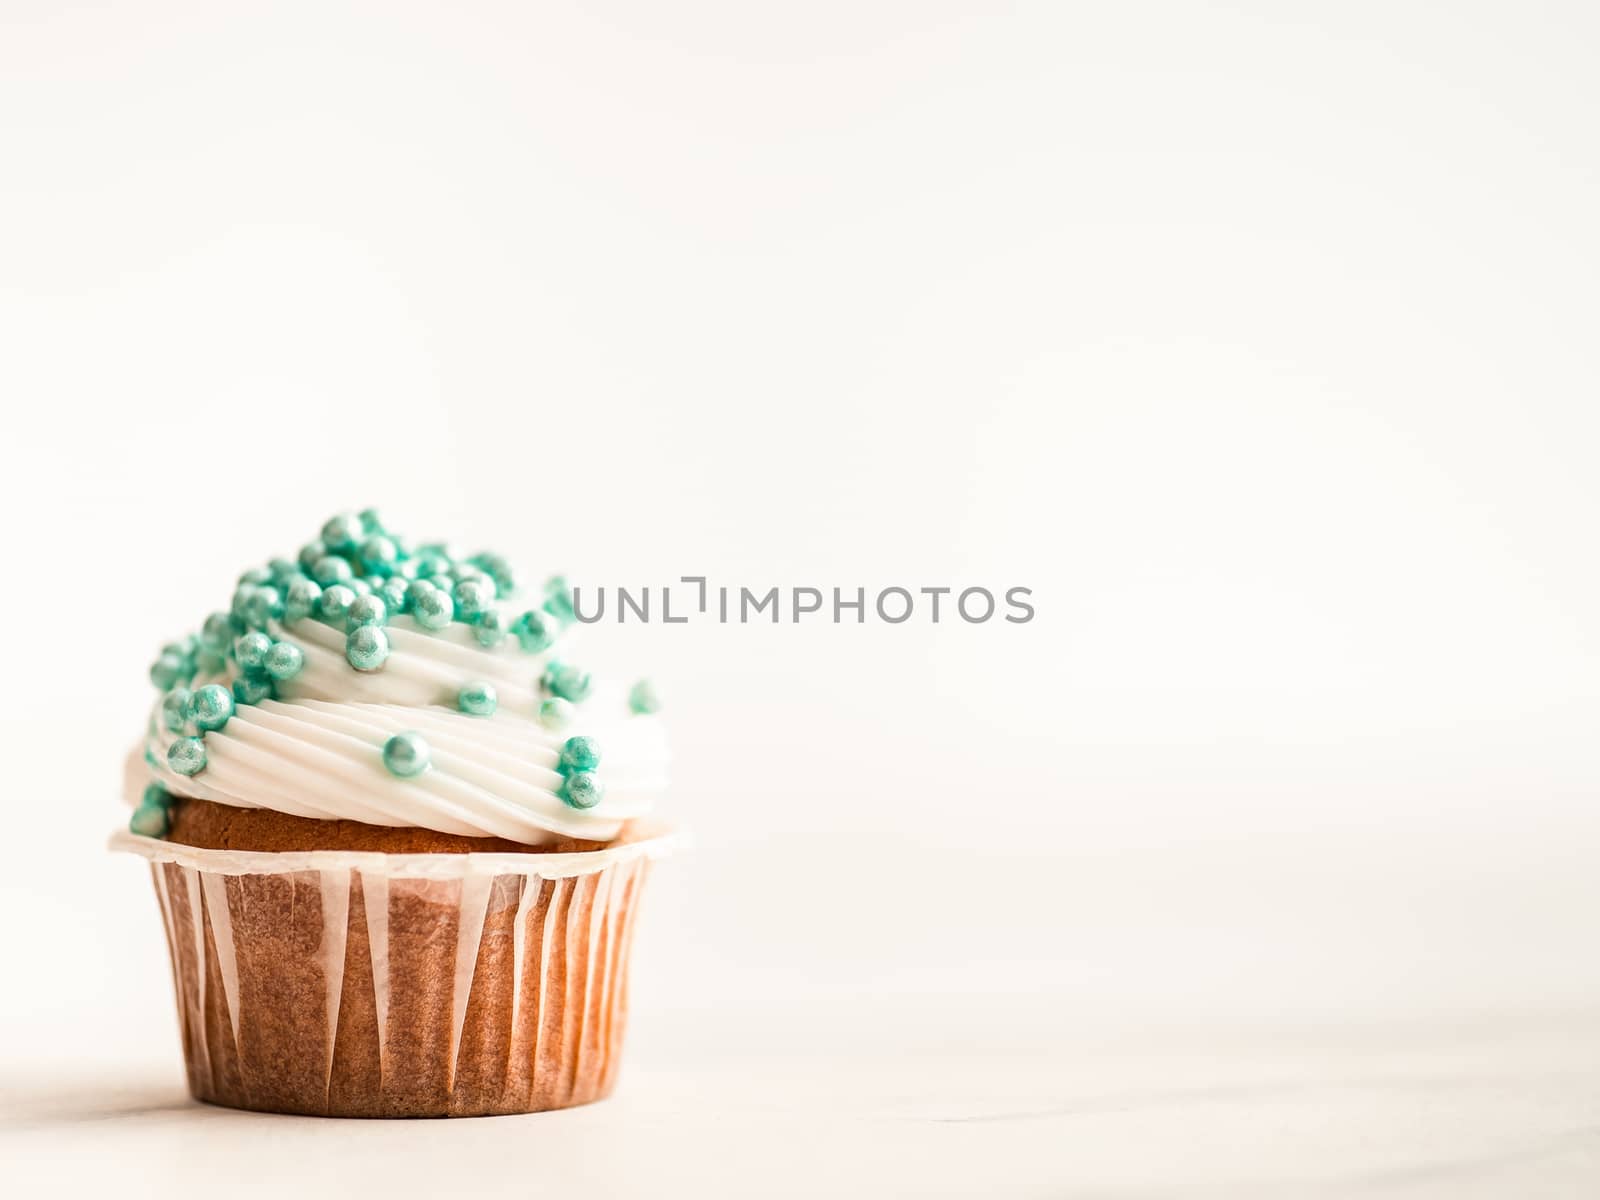 Cupcake decorated blue sprinkles and copy space right. White marble background.